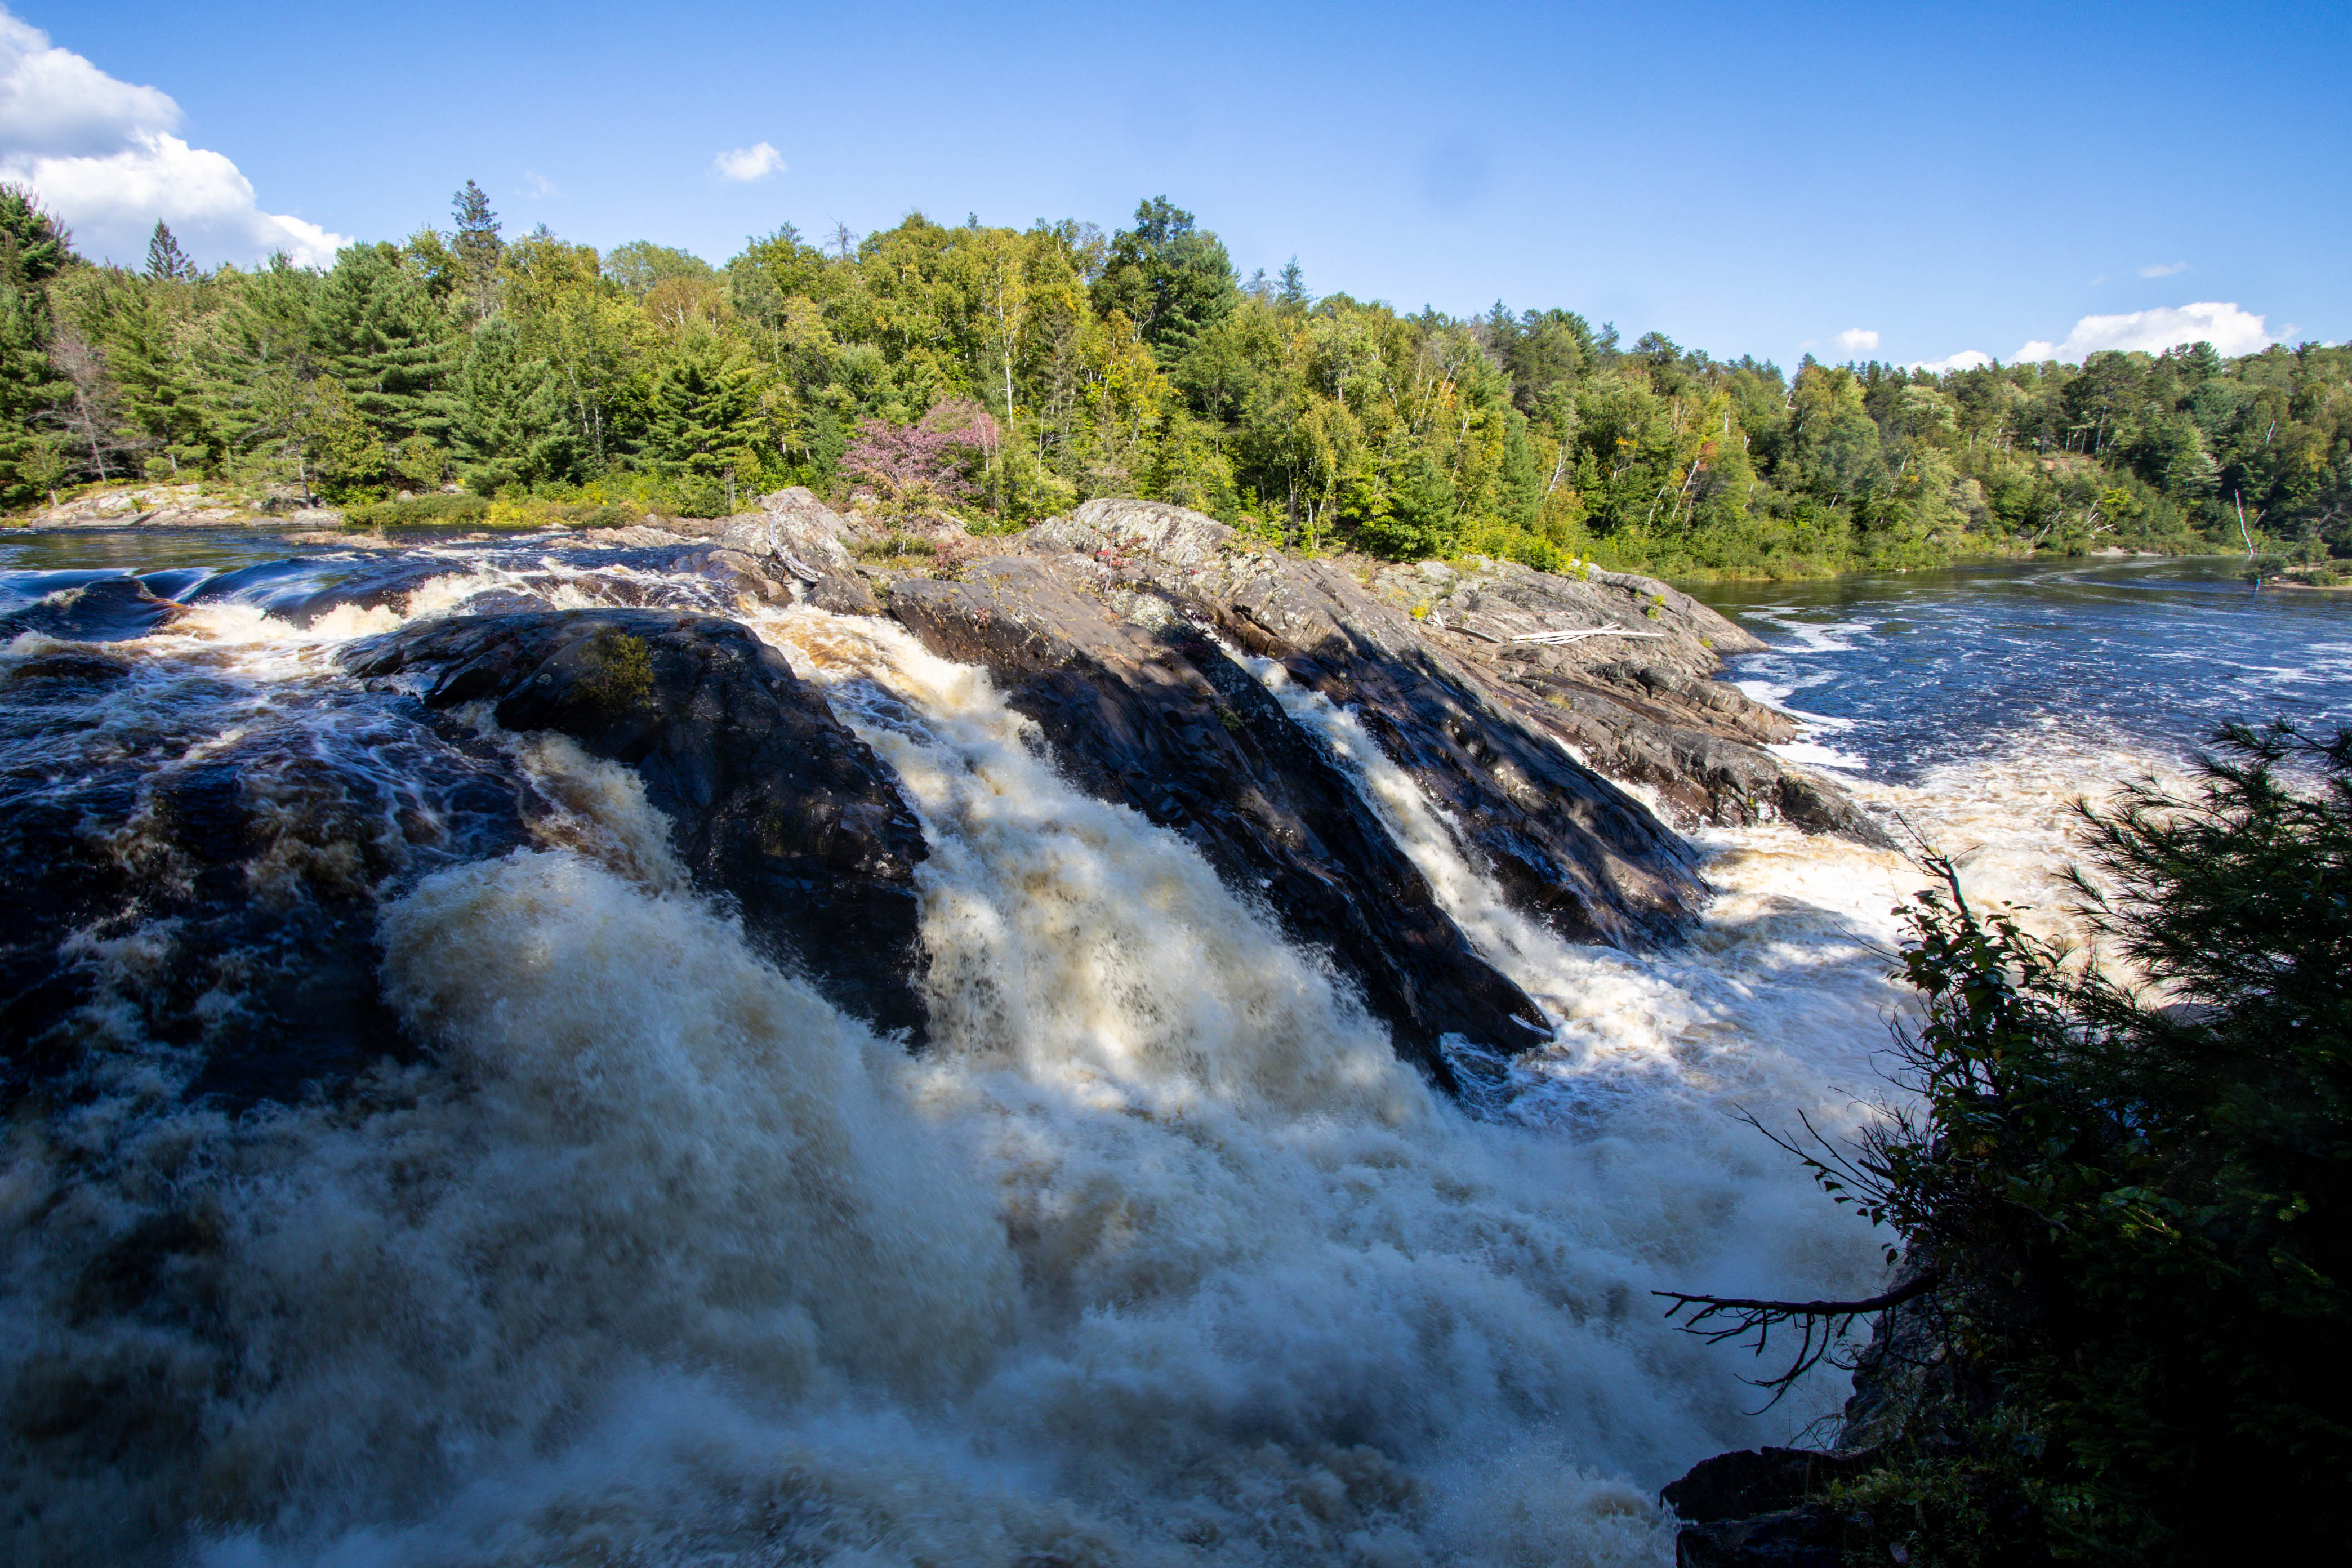 The roaring turbulent waters of Chutes Falls, a long low high-volume waterfall.